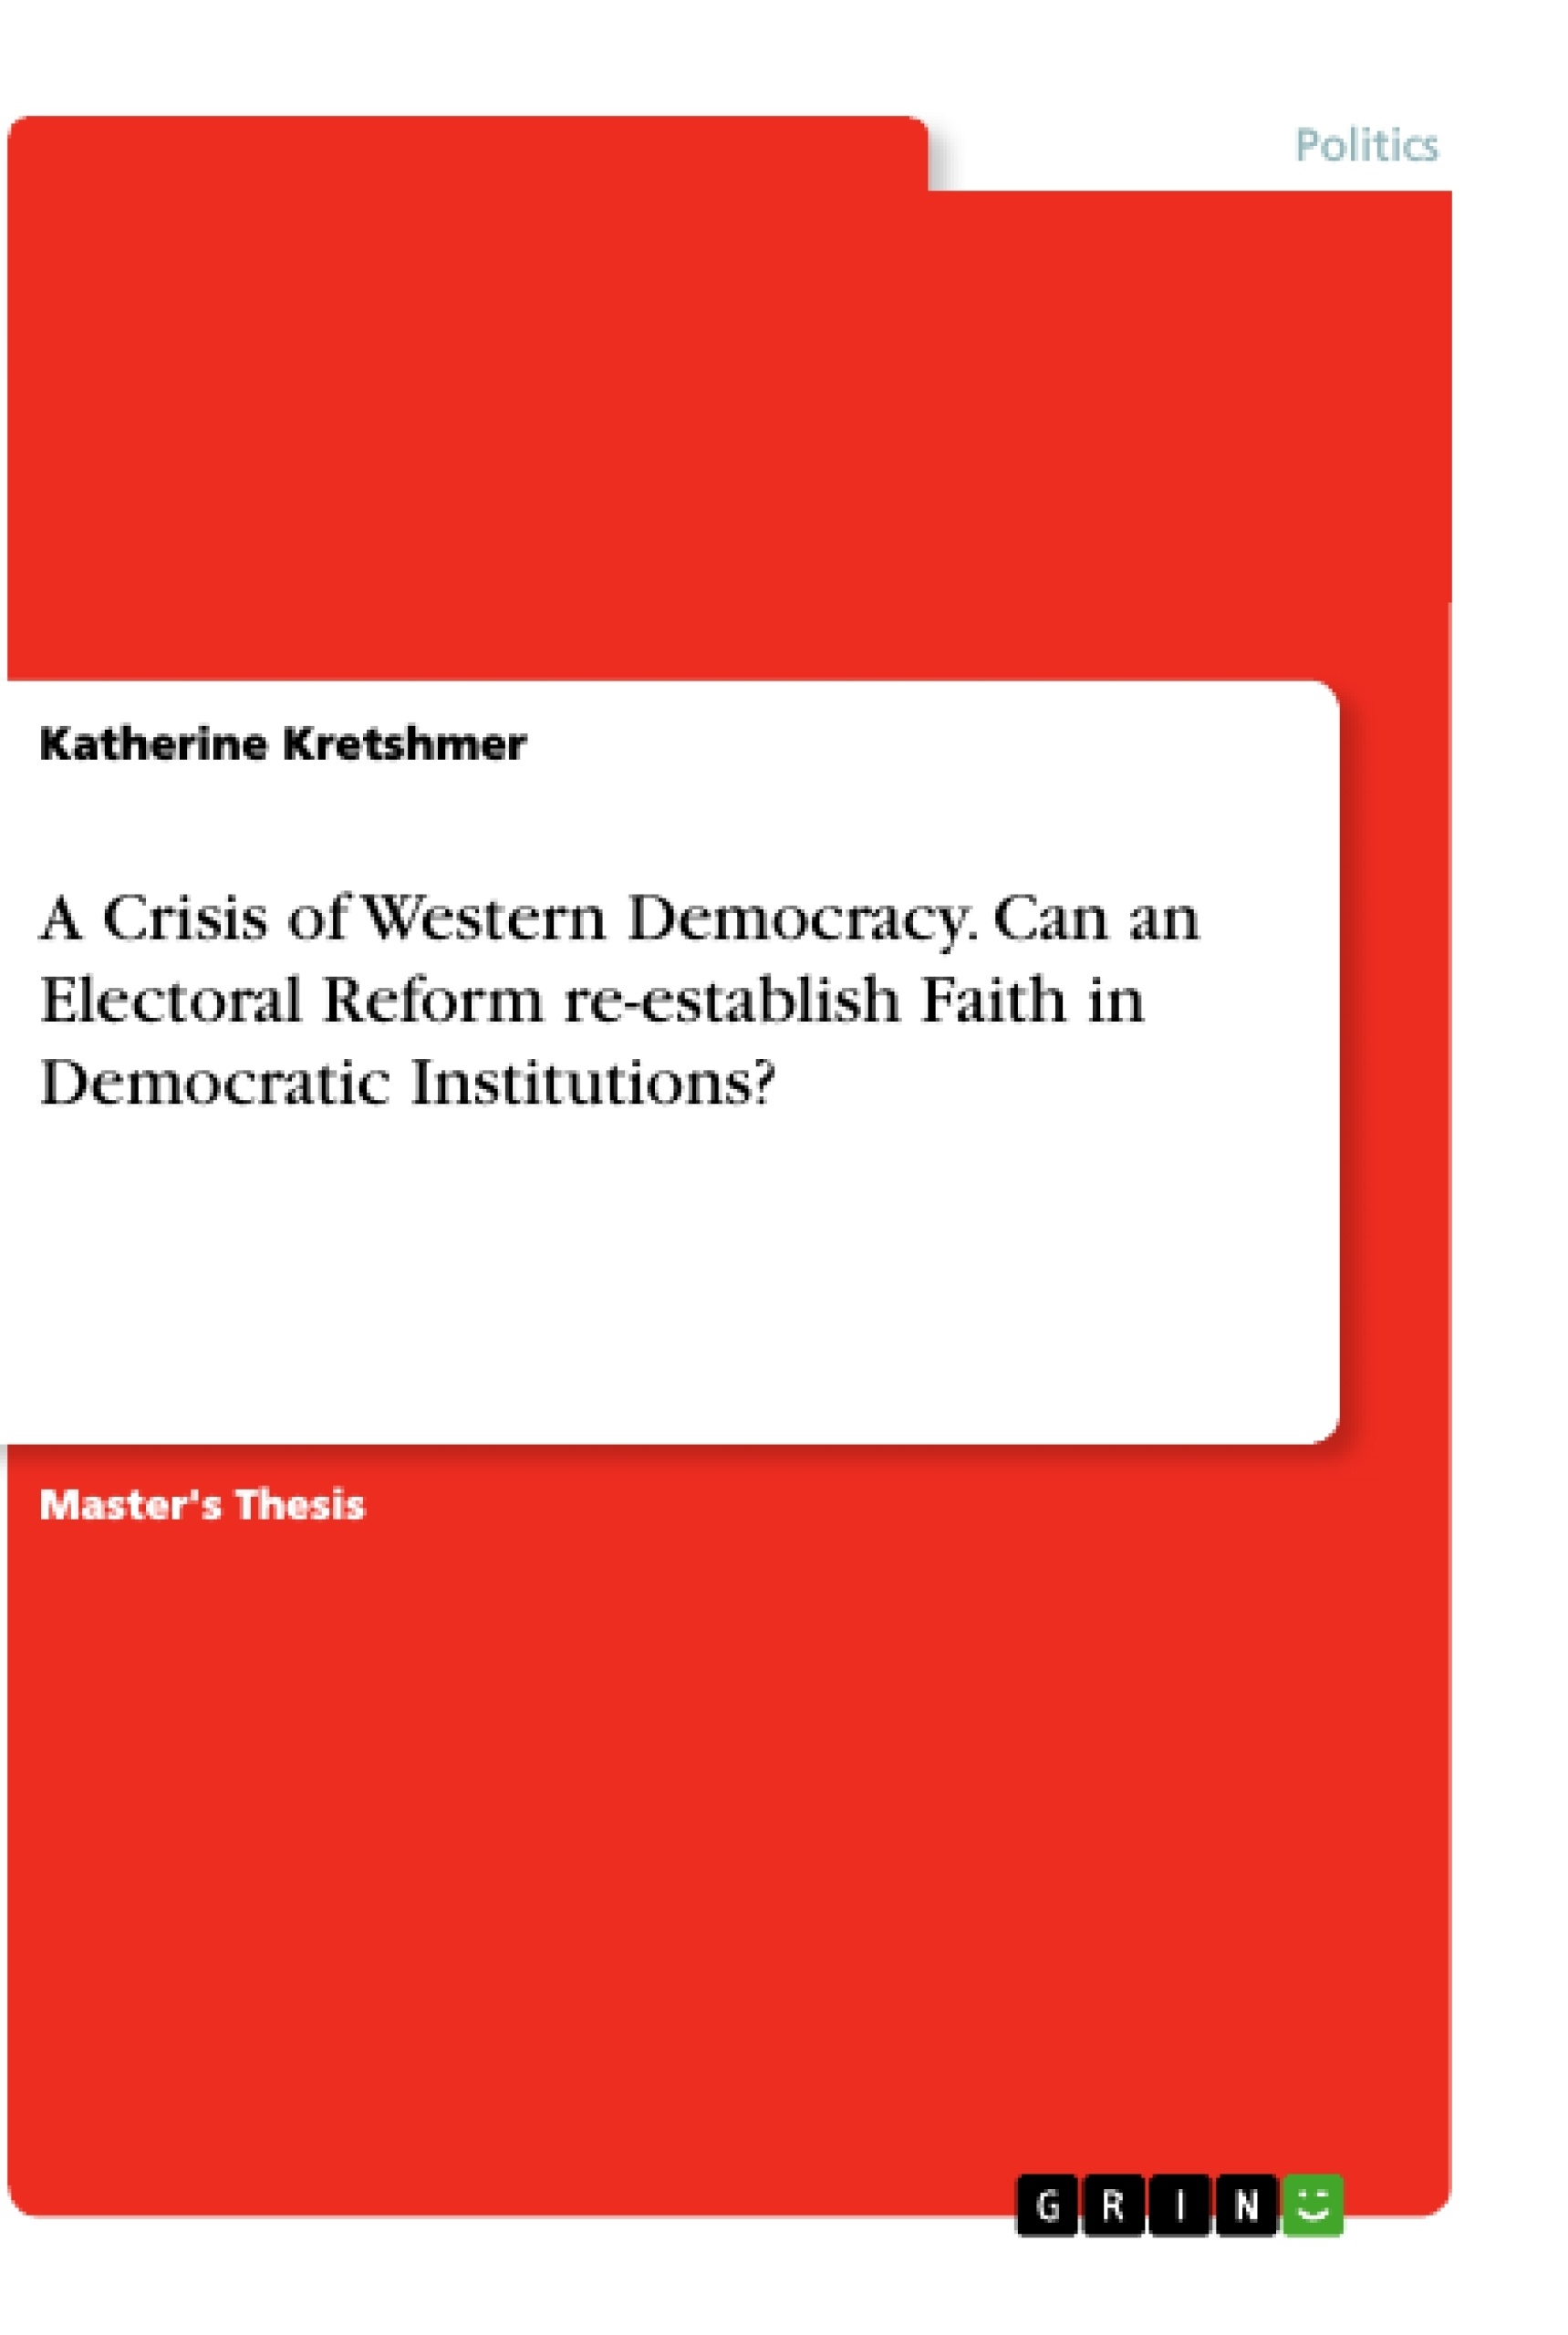 Title: A Crisis of Western Democracy. Can an Electoral Reform re-establish Faith in Democratic Institutions?